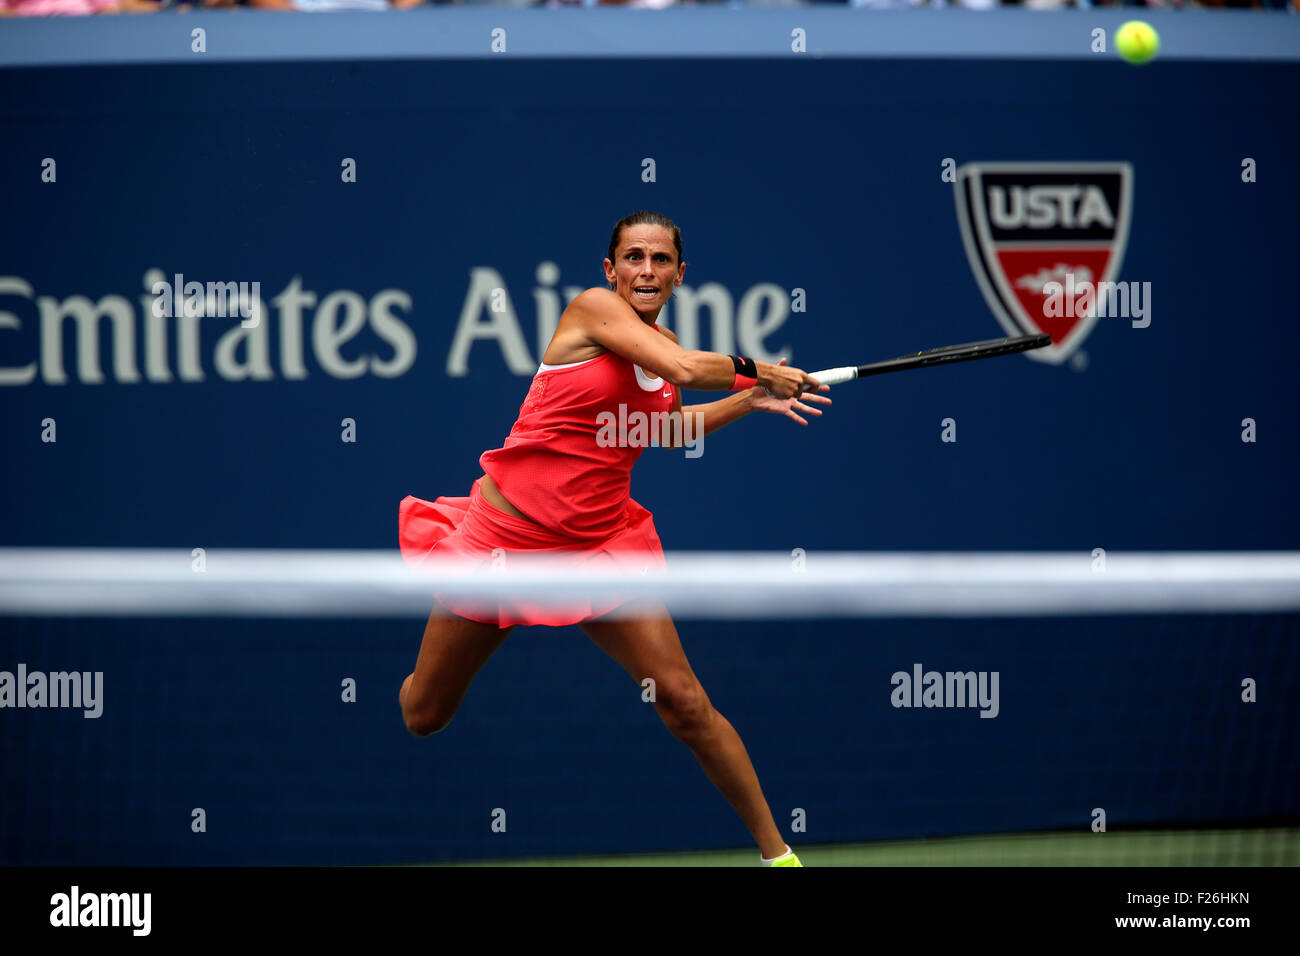 New York, USA. 12th Sep, 2015. Roberta Vinci of Italy returns a shot to countrywoman Flavia Penetta during the women's final of the U.S. Open at Flushing Meadows, New York on the afternoon of September 12th, 2015.  Pennetta won the match 7-6 (7-4), 6-2 Credit:  Adam Stoltman/Alamy Live News Stock Photo